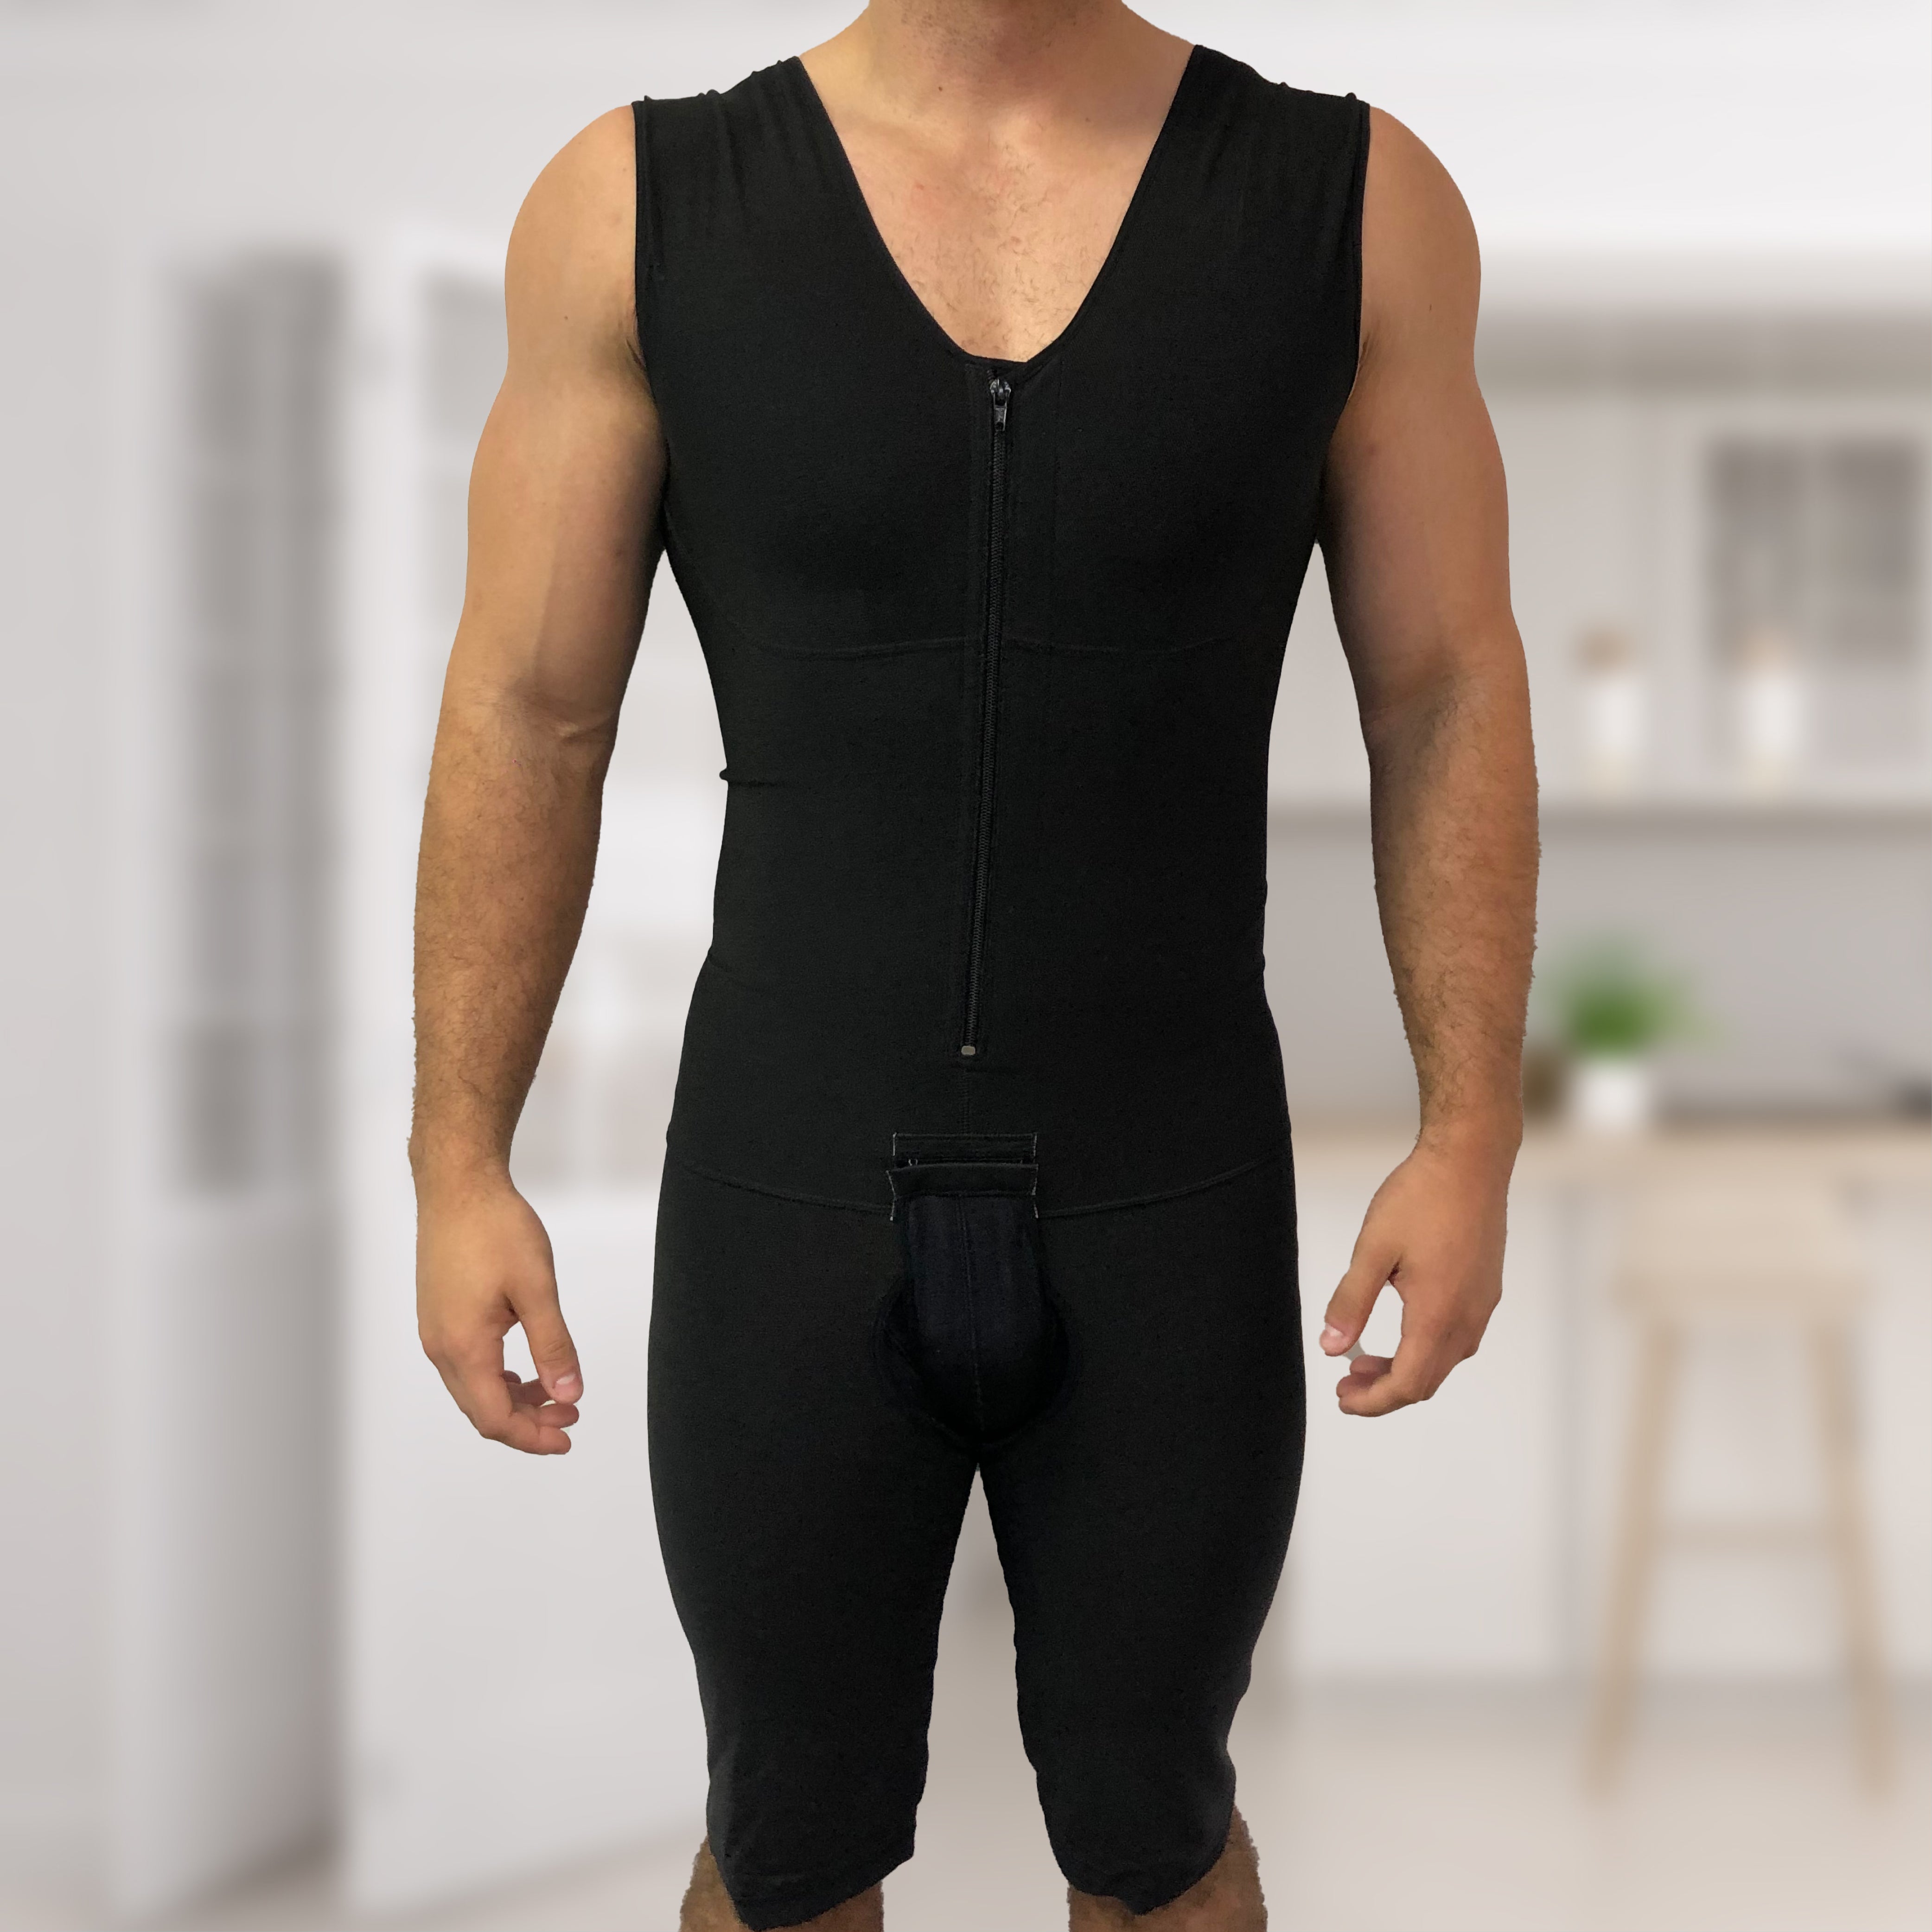 Men's Full Body Compression - SILIMED - Post liposuction recovery garments  and scars management products